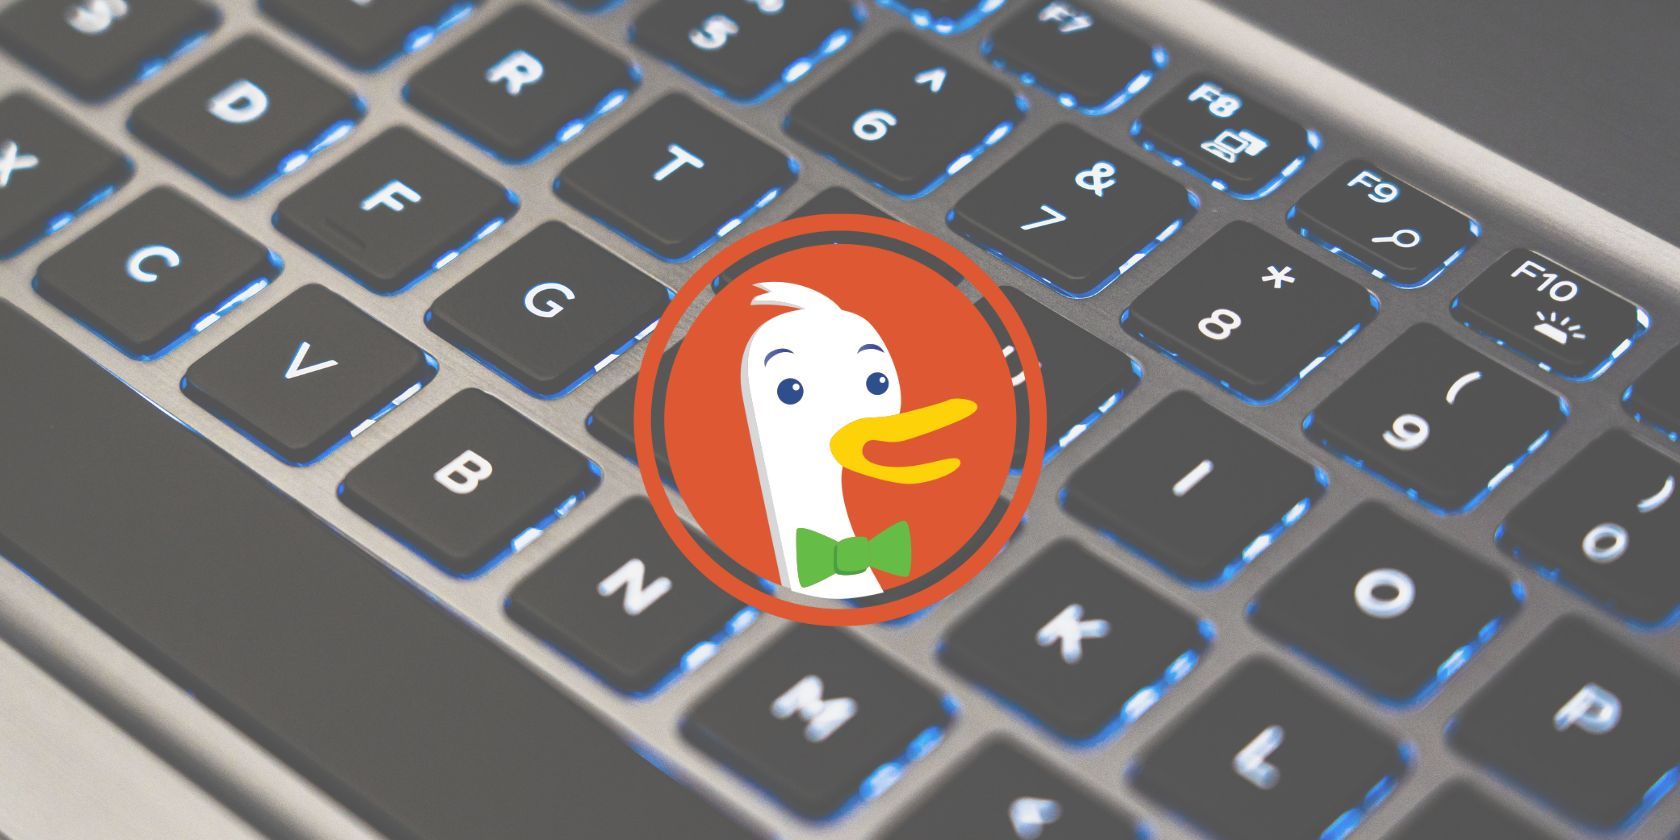 Why You Should Consider Using DuckDuckGo as Your Search Engine